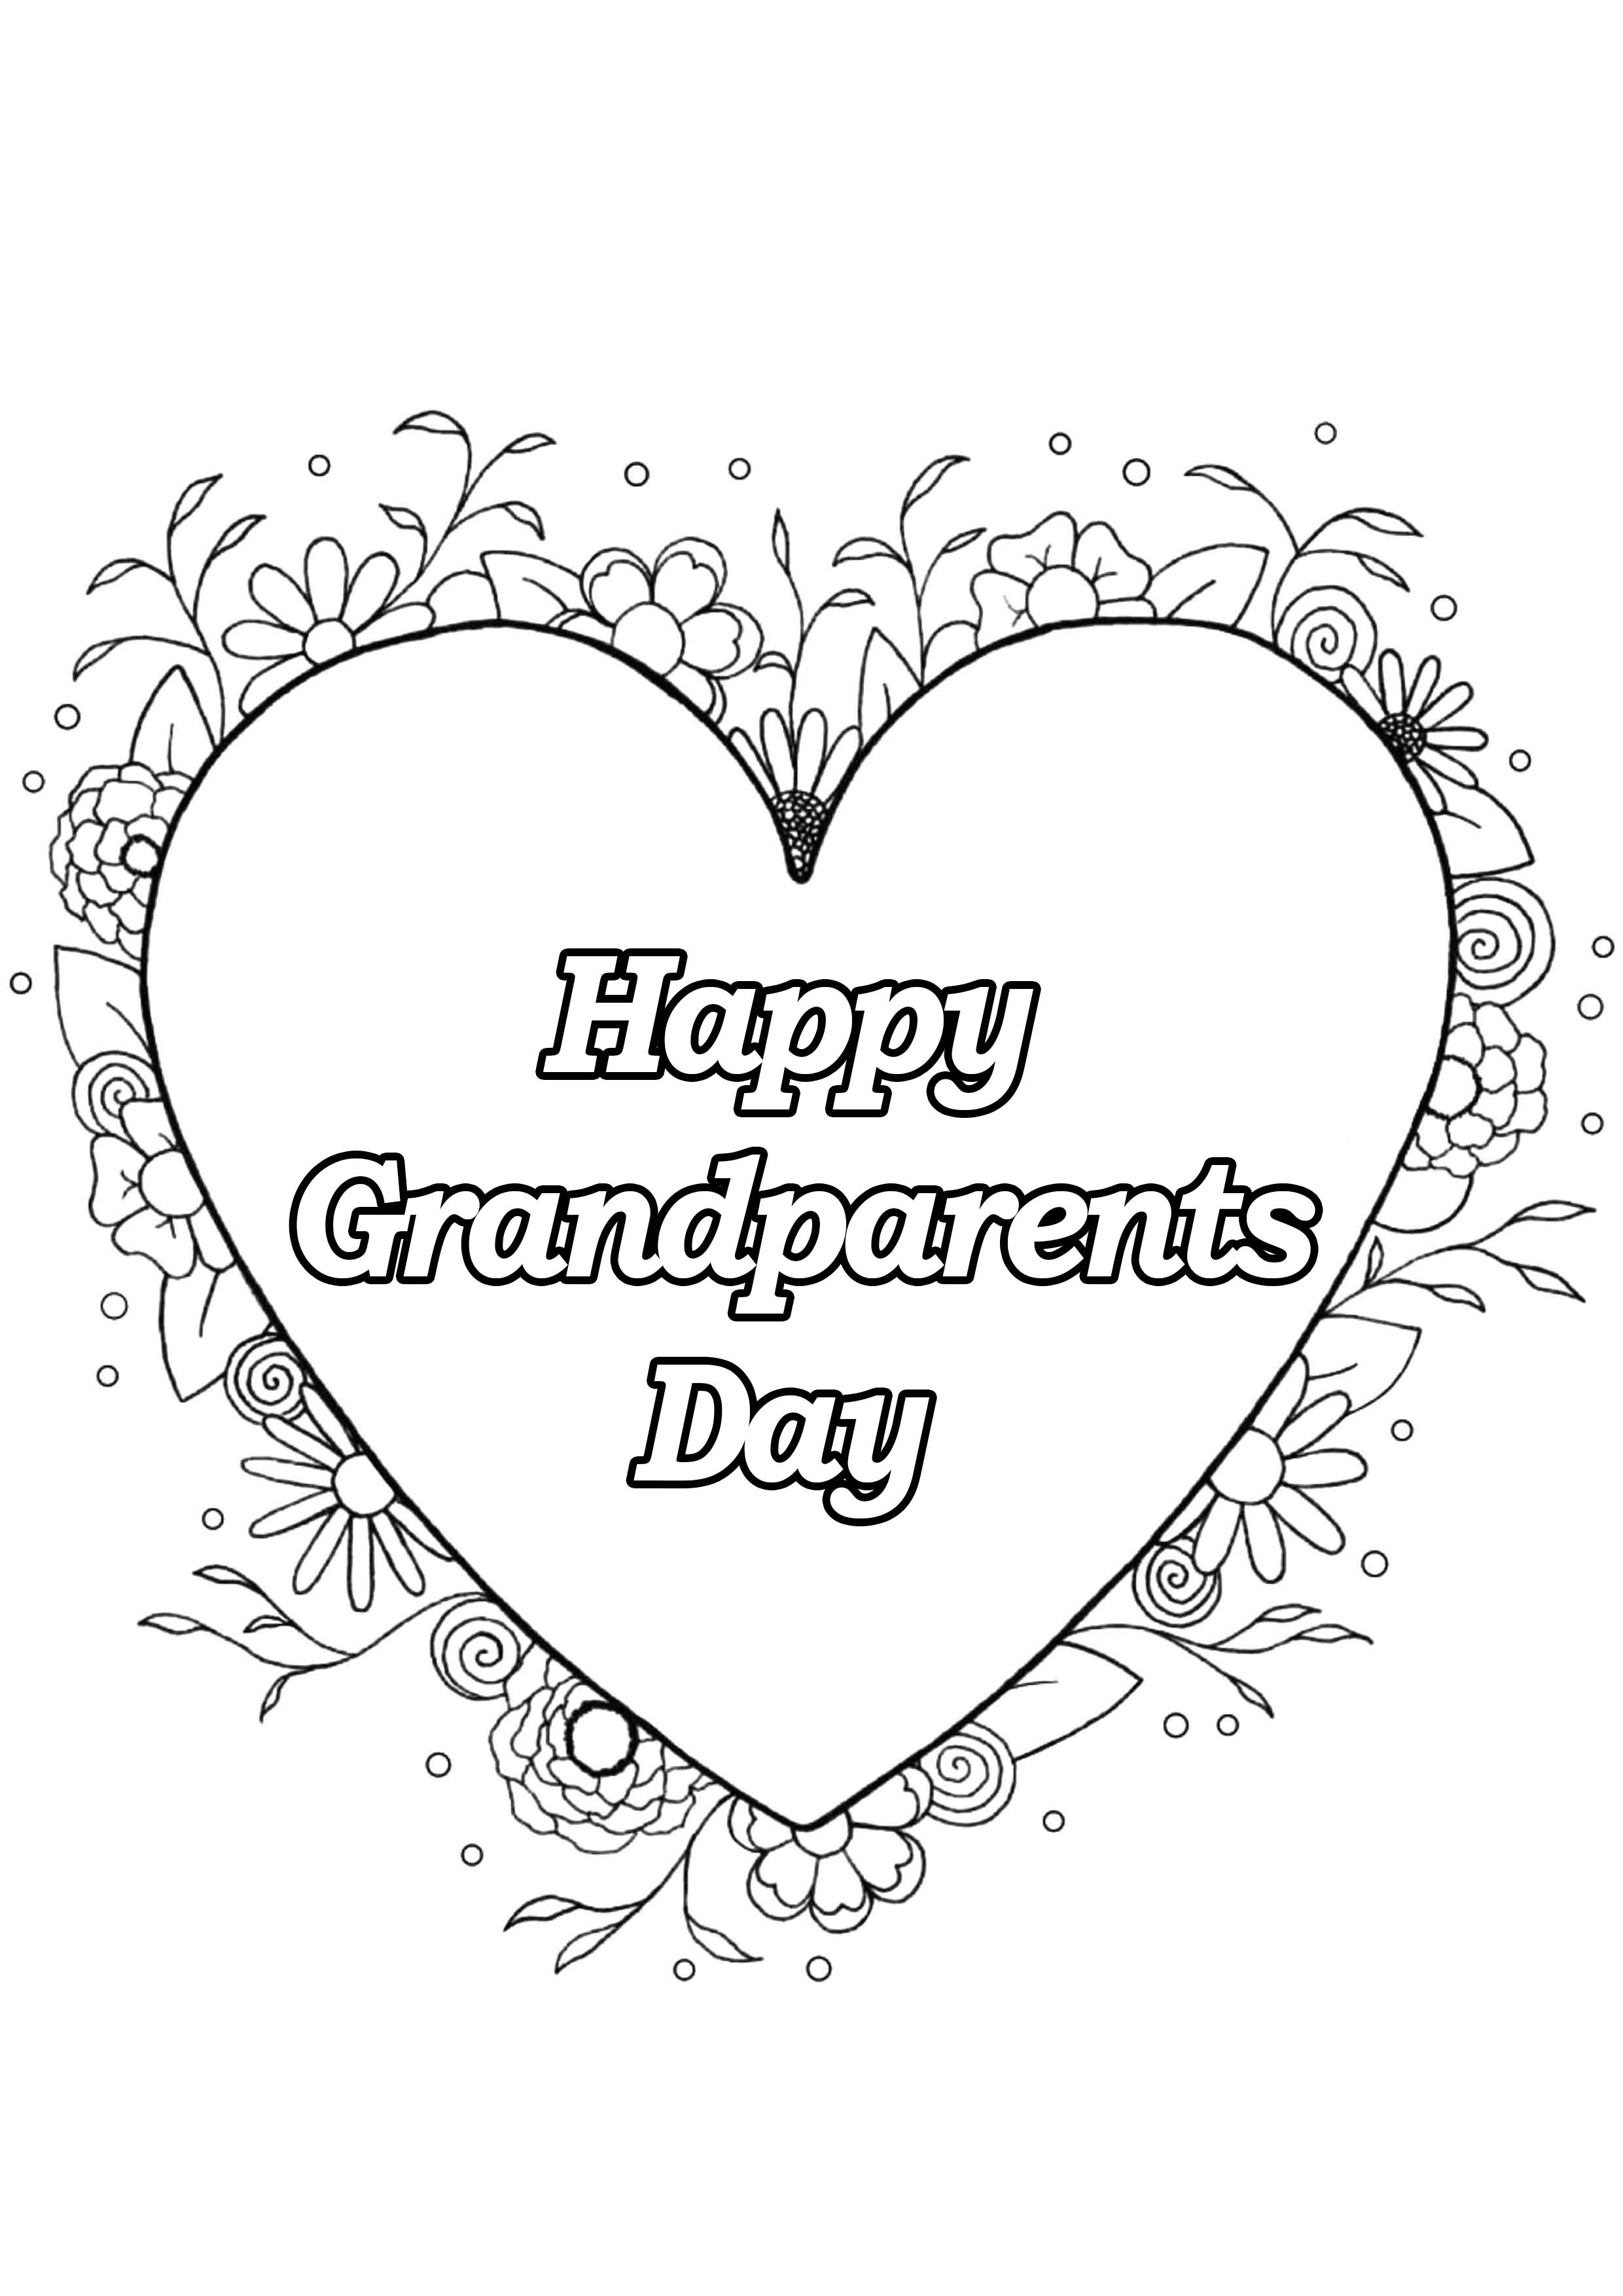 Happy Grandparents Day Coloring Pages Coloring Pages